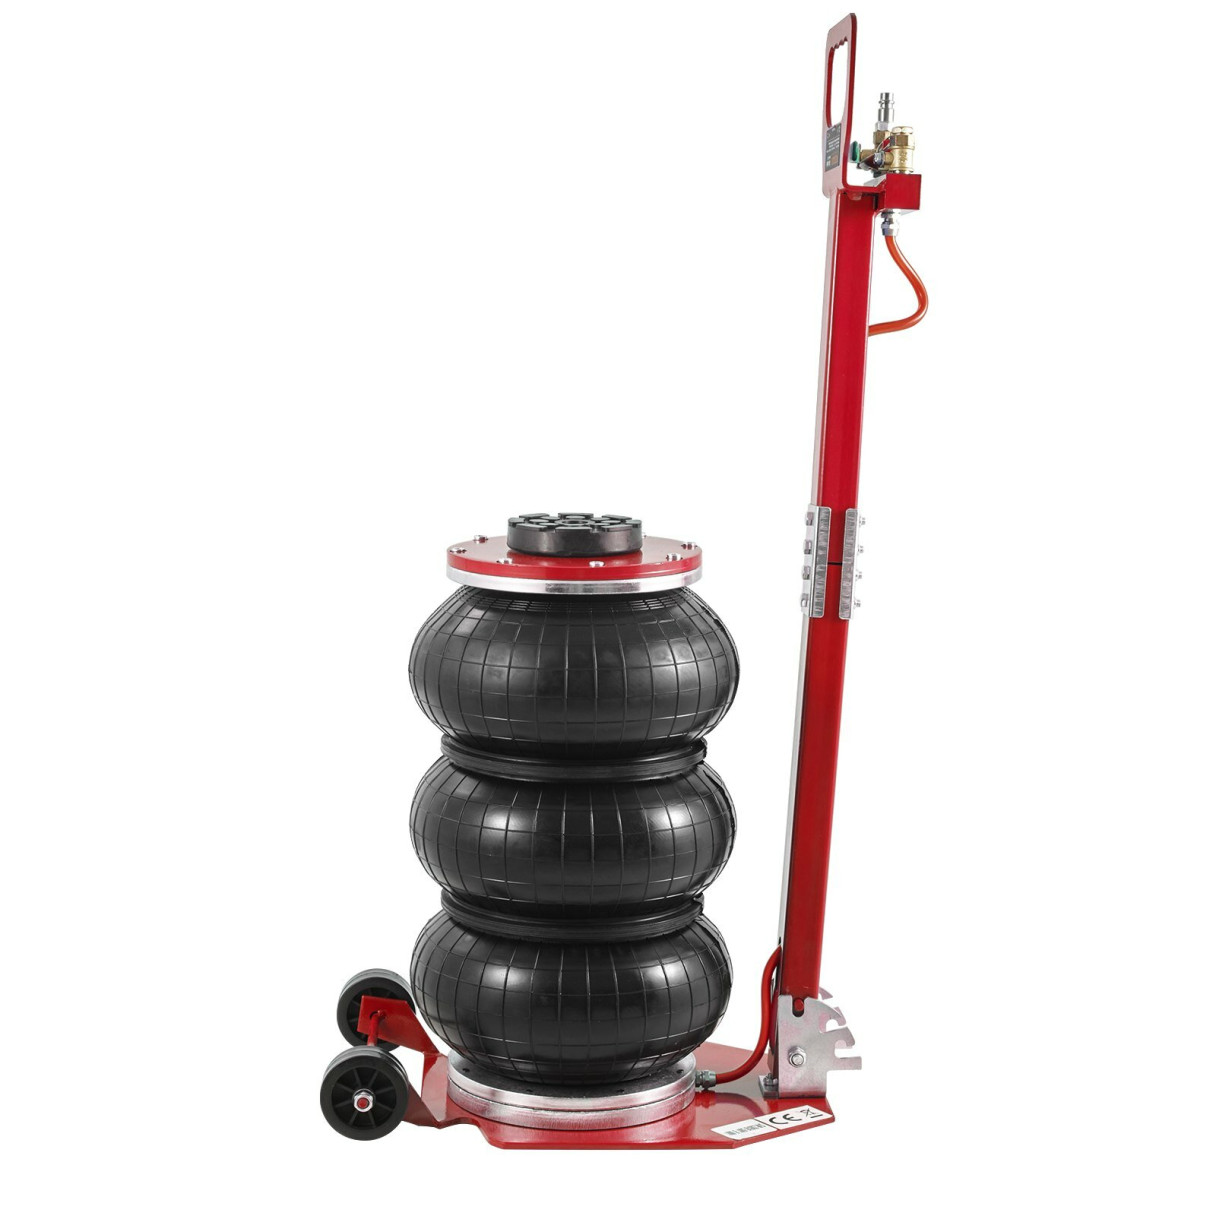 iMars Air Jack 3 Ton/6600 lbs Triple Bag Air Jack Airbag Jack with Six Steel Pipes 17.7 inch/470 mm Lift up Fast Lifting Pneumatic Jack with Adjustable Long Handle for Cars Garages Repair